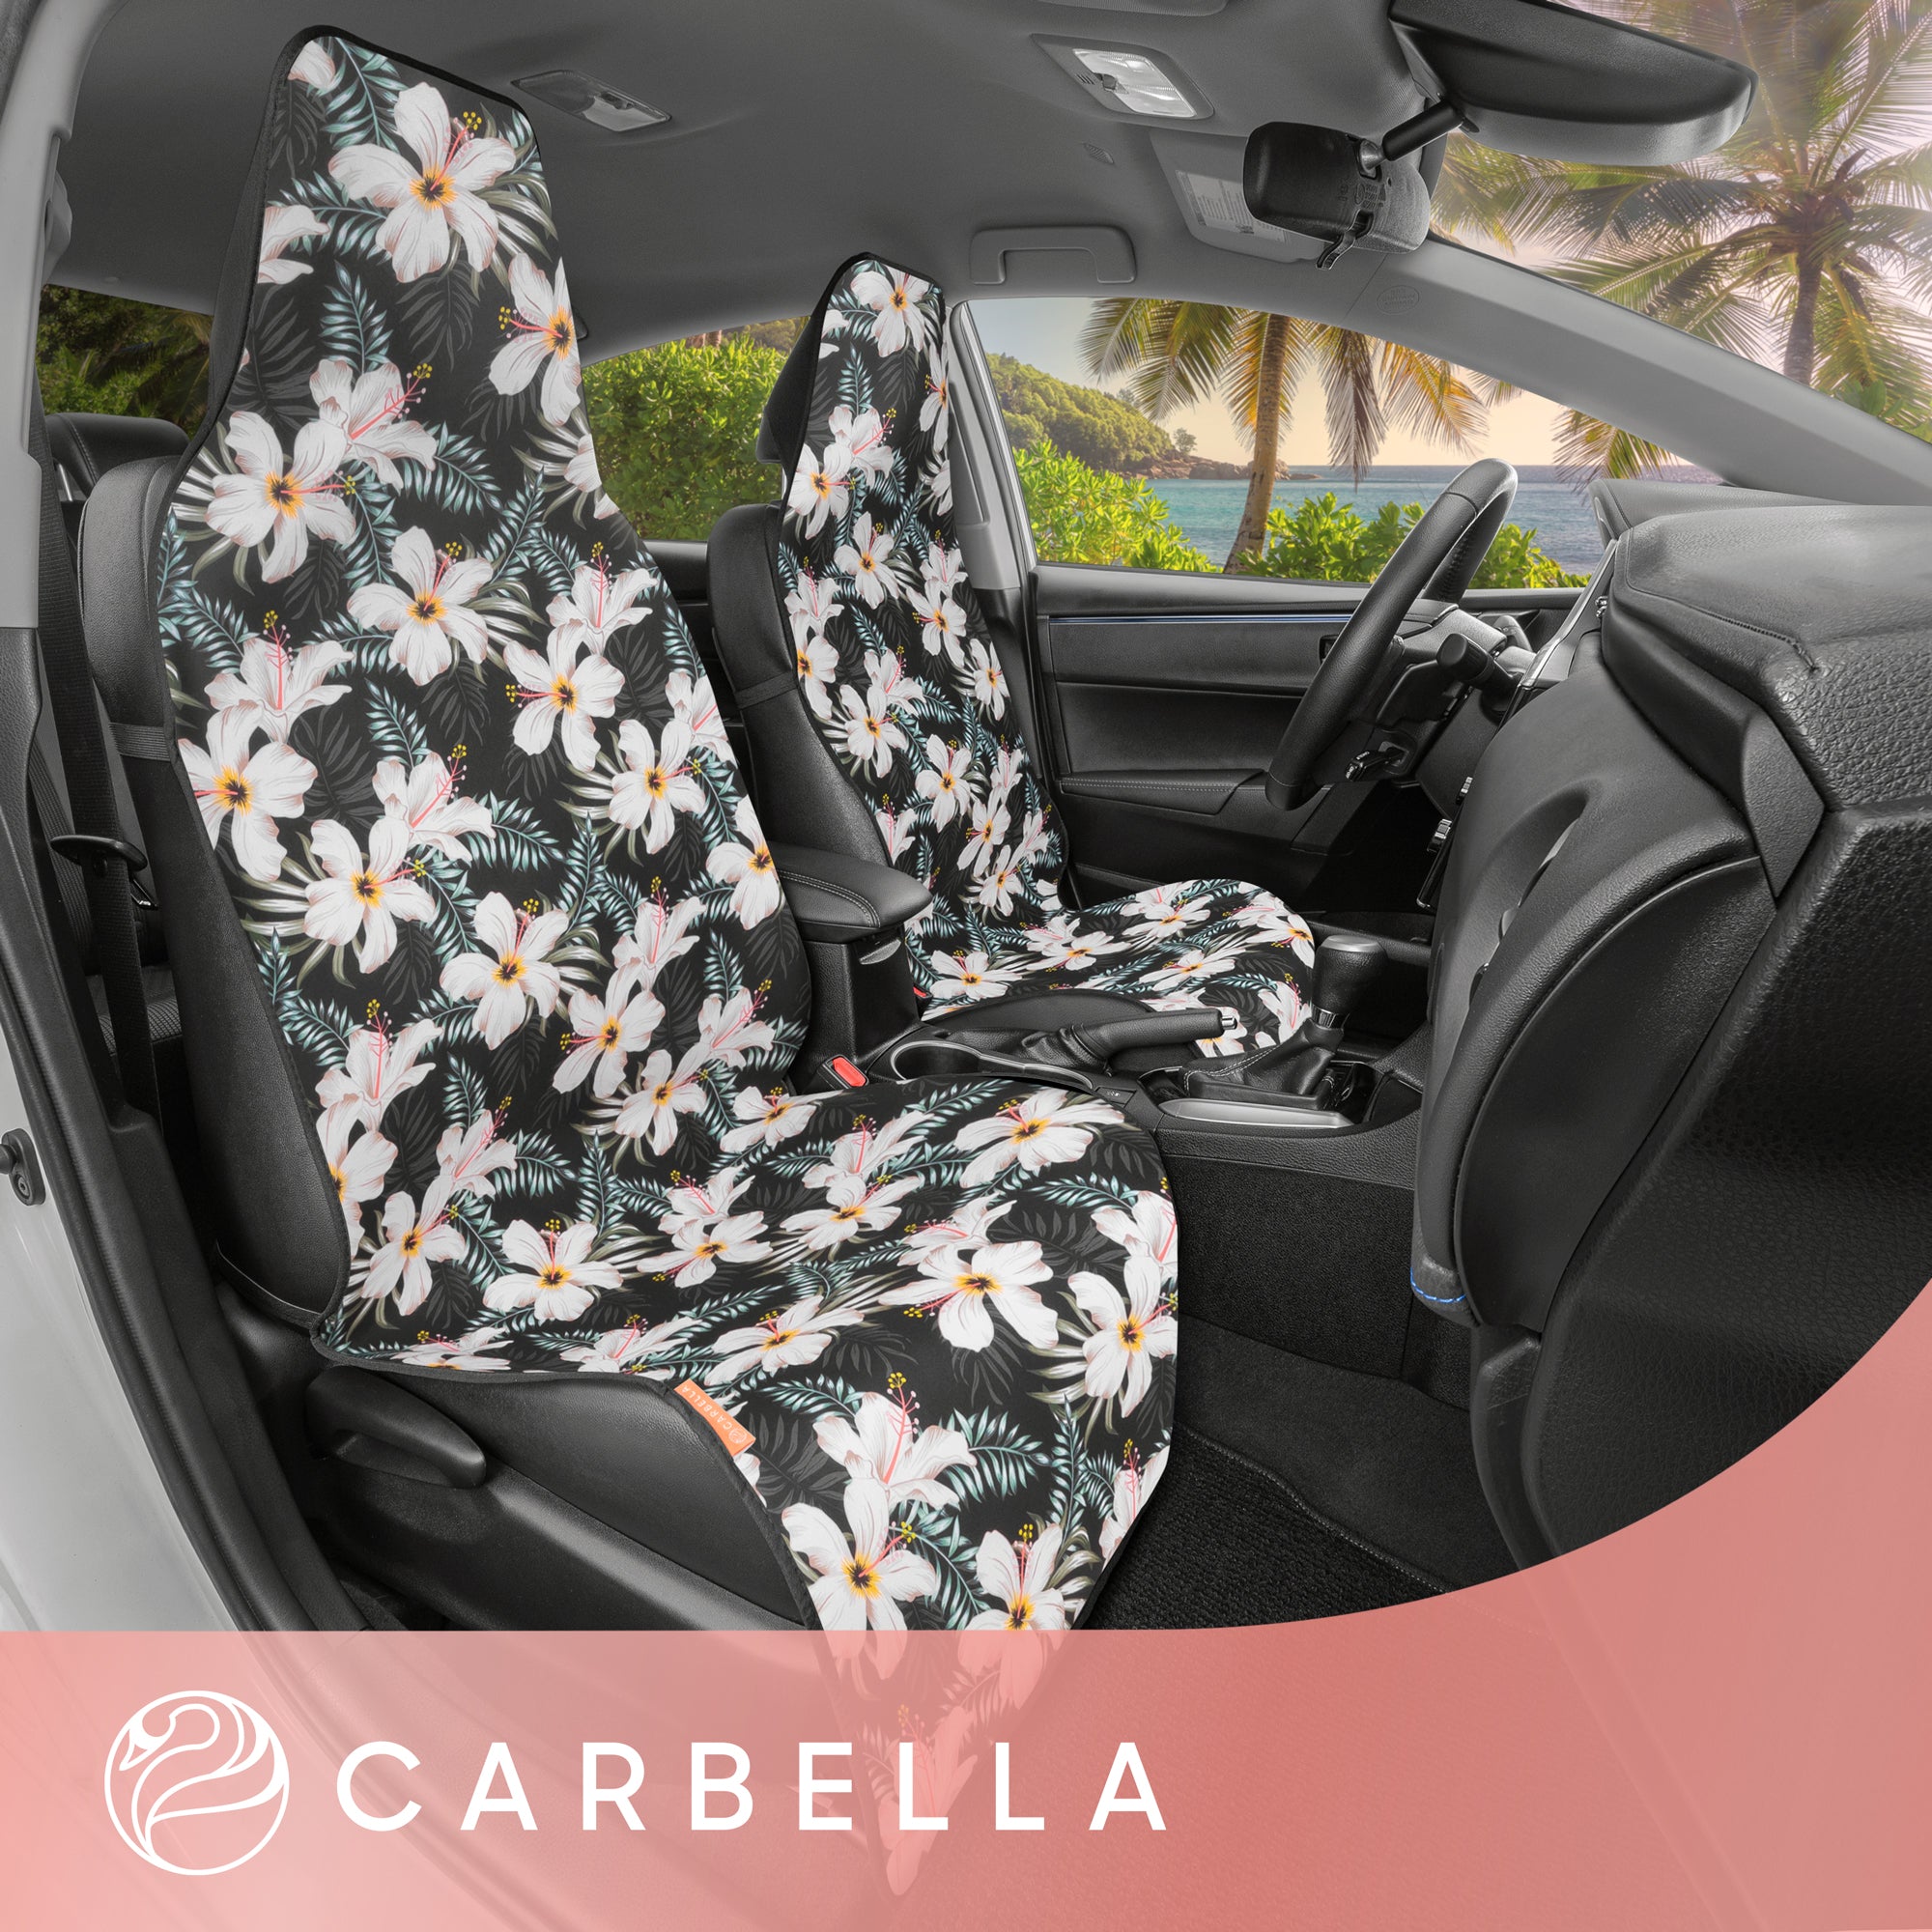 Carbella White Tropical Floral Car Seat Covers, 2 Pack Flower & Palm Leaves Front Seat Covers for Cars Trucks SUV, Car Accessories for Women